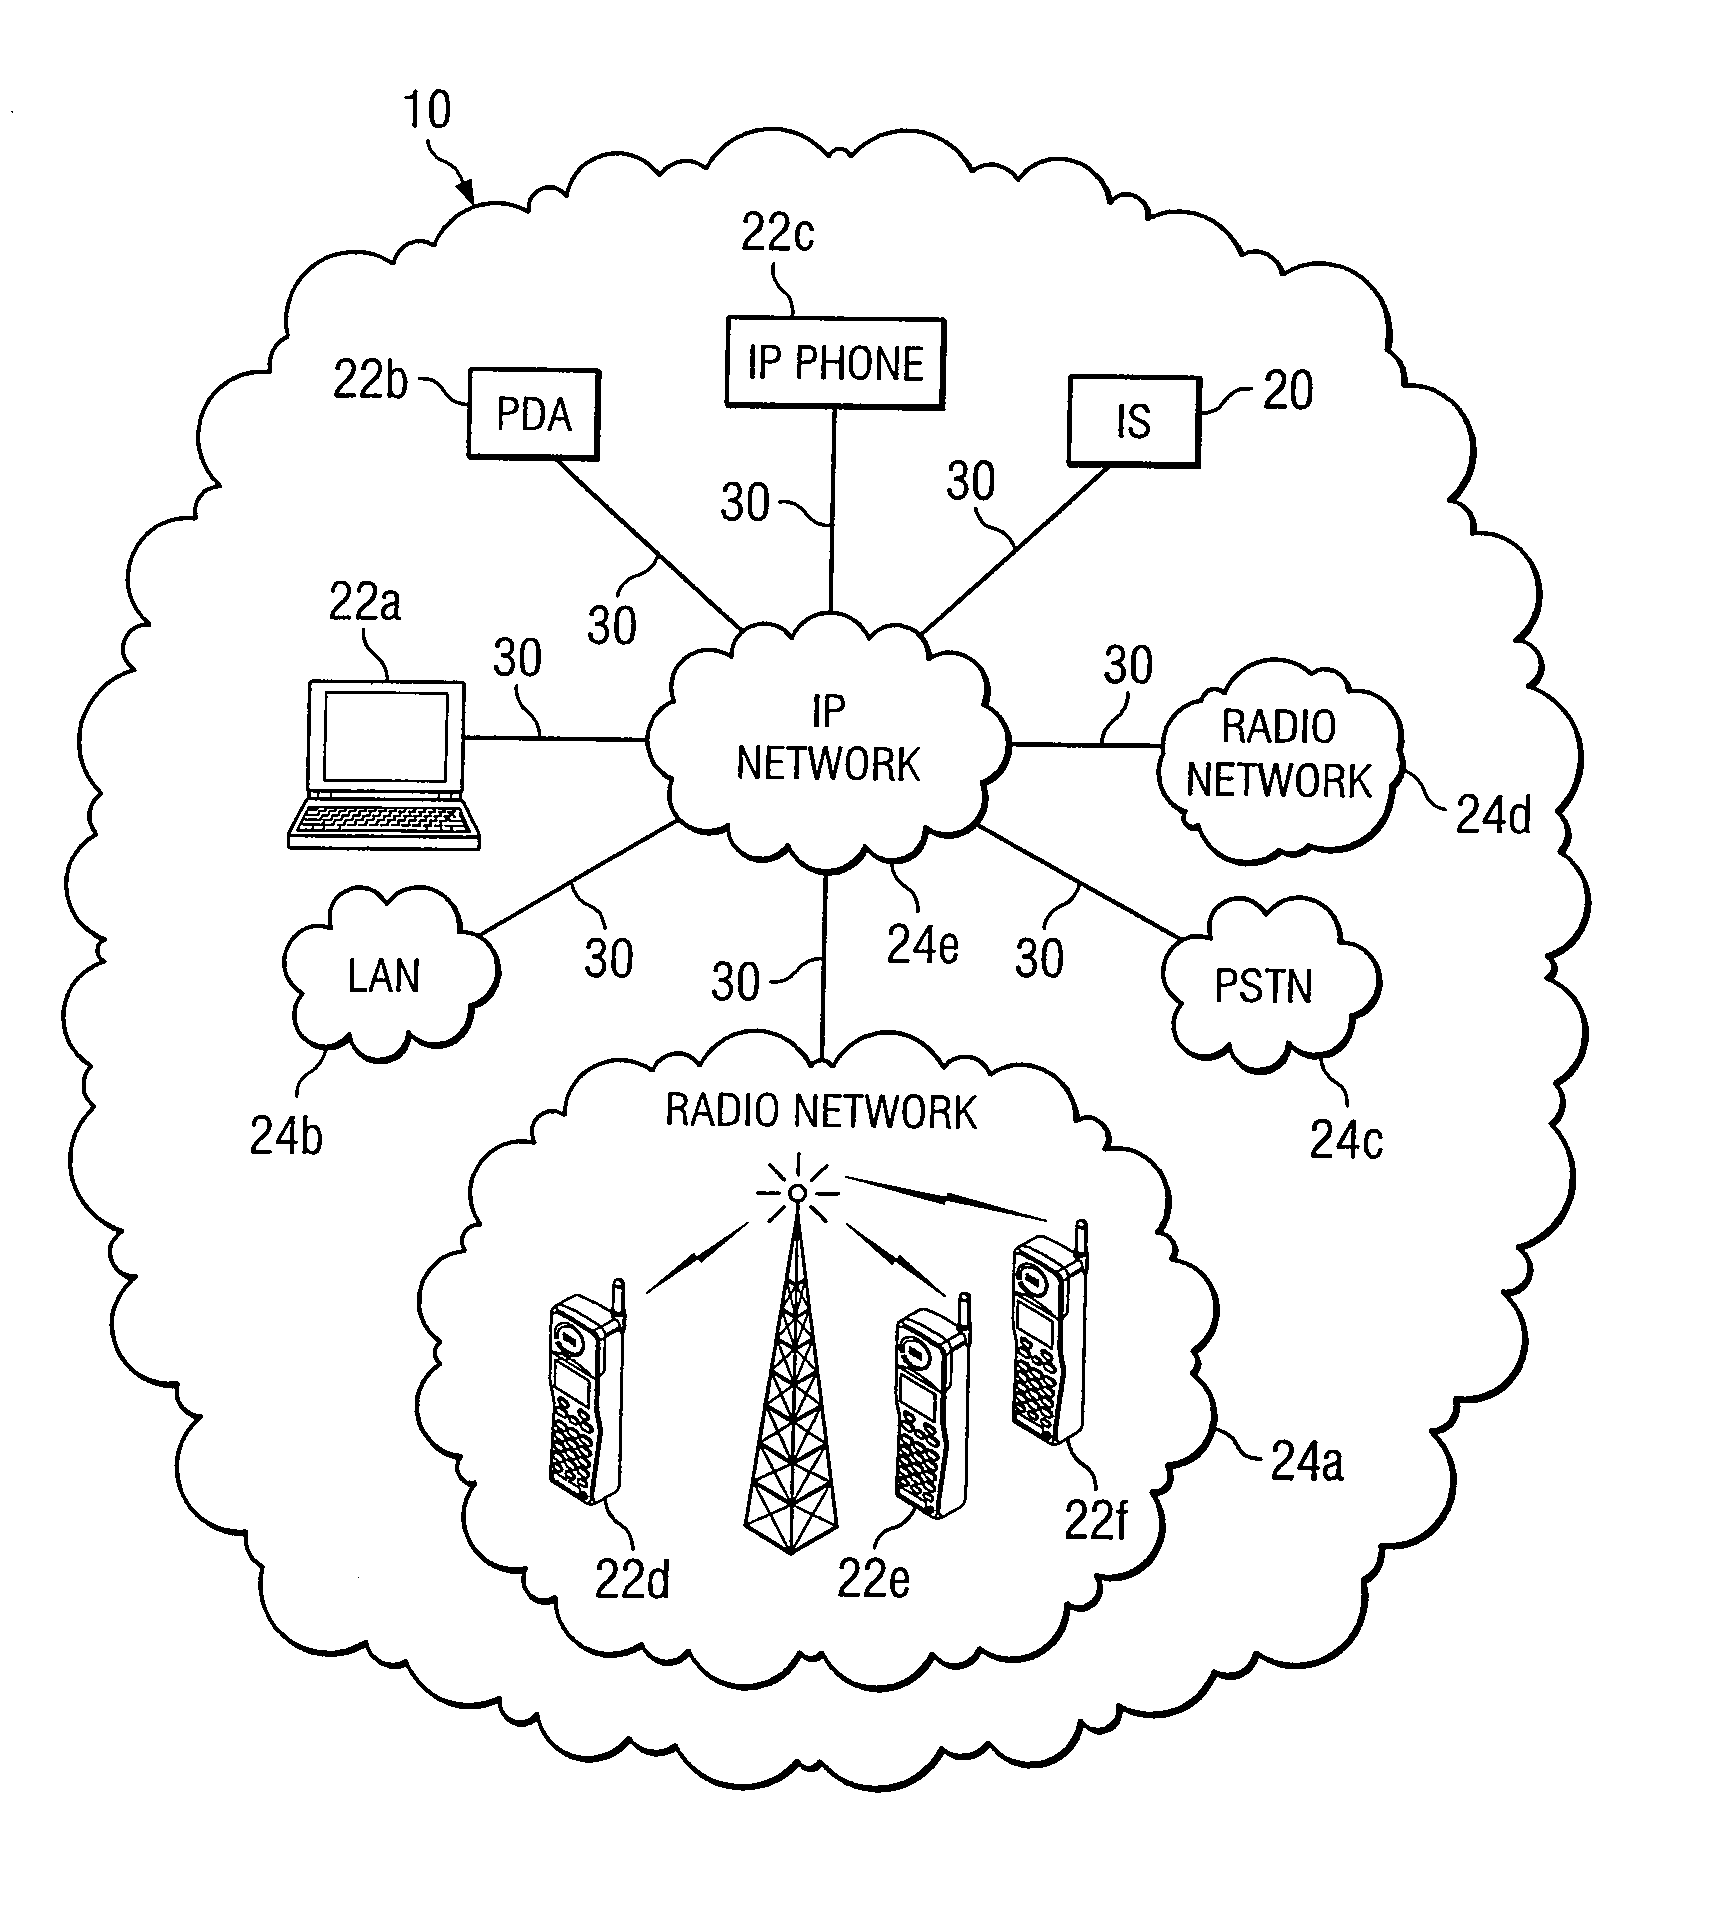 Method and System For Providing Information About a Push-To-Talk Communication Session